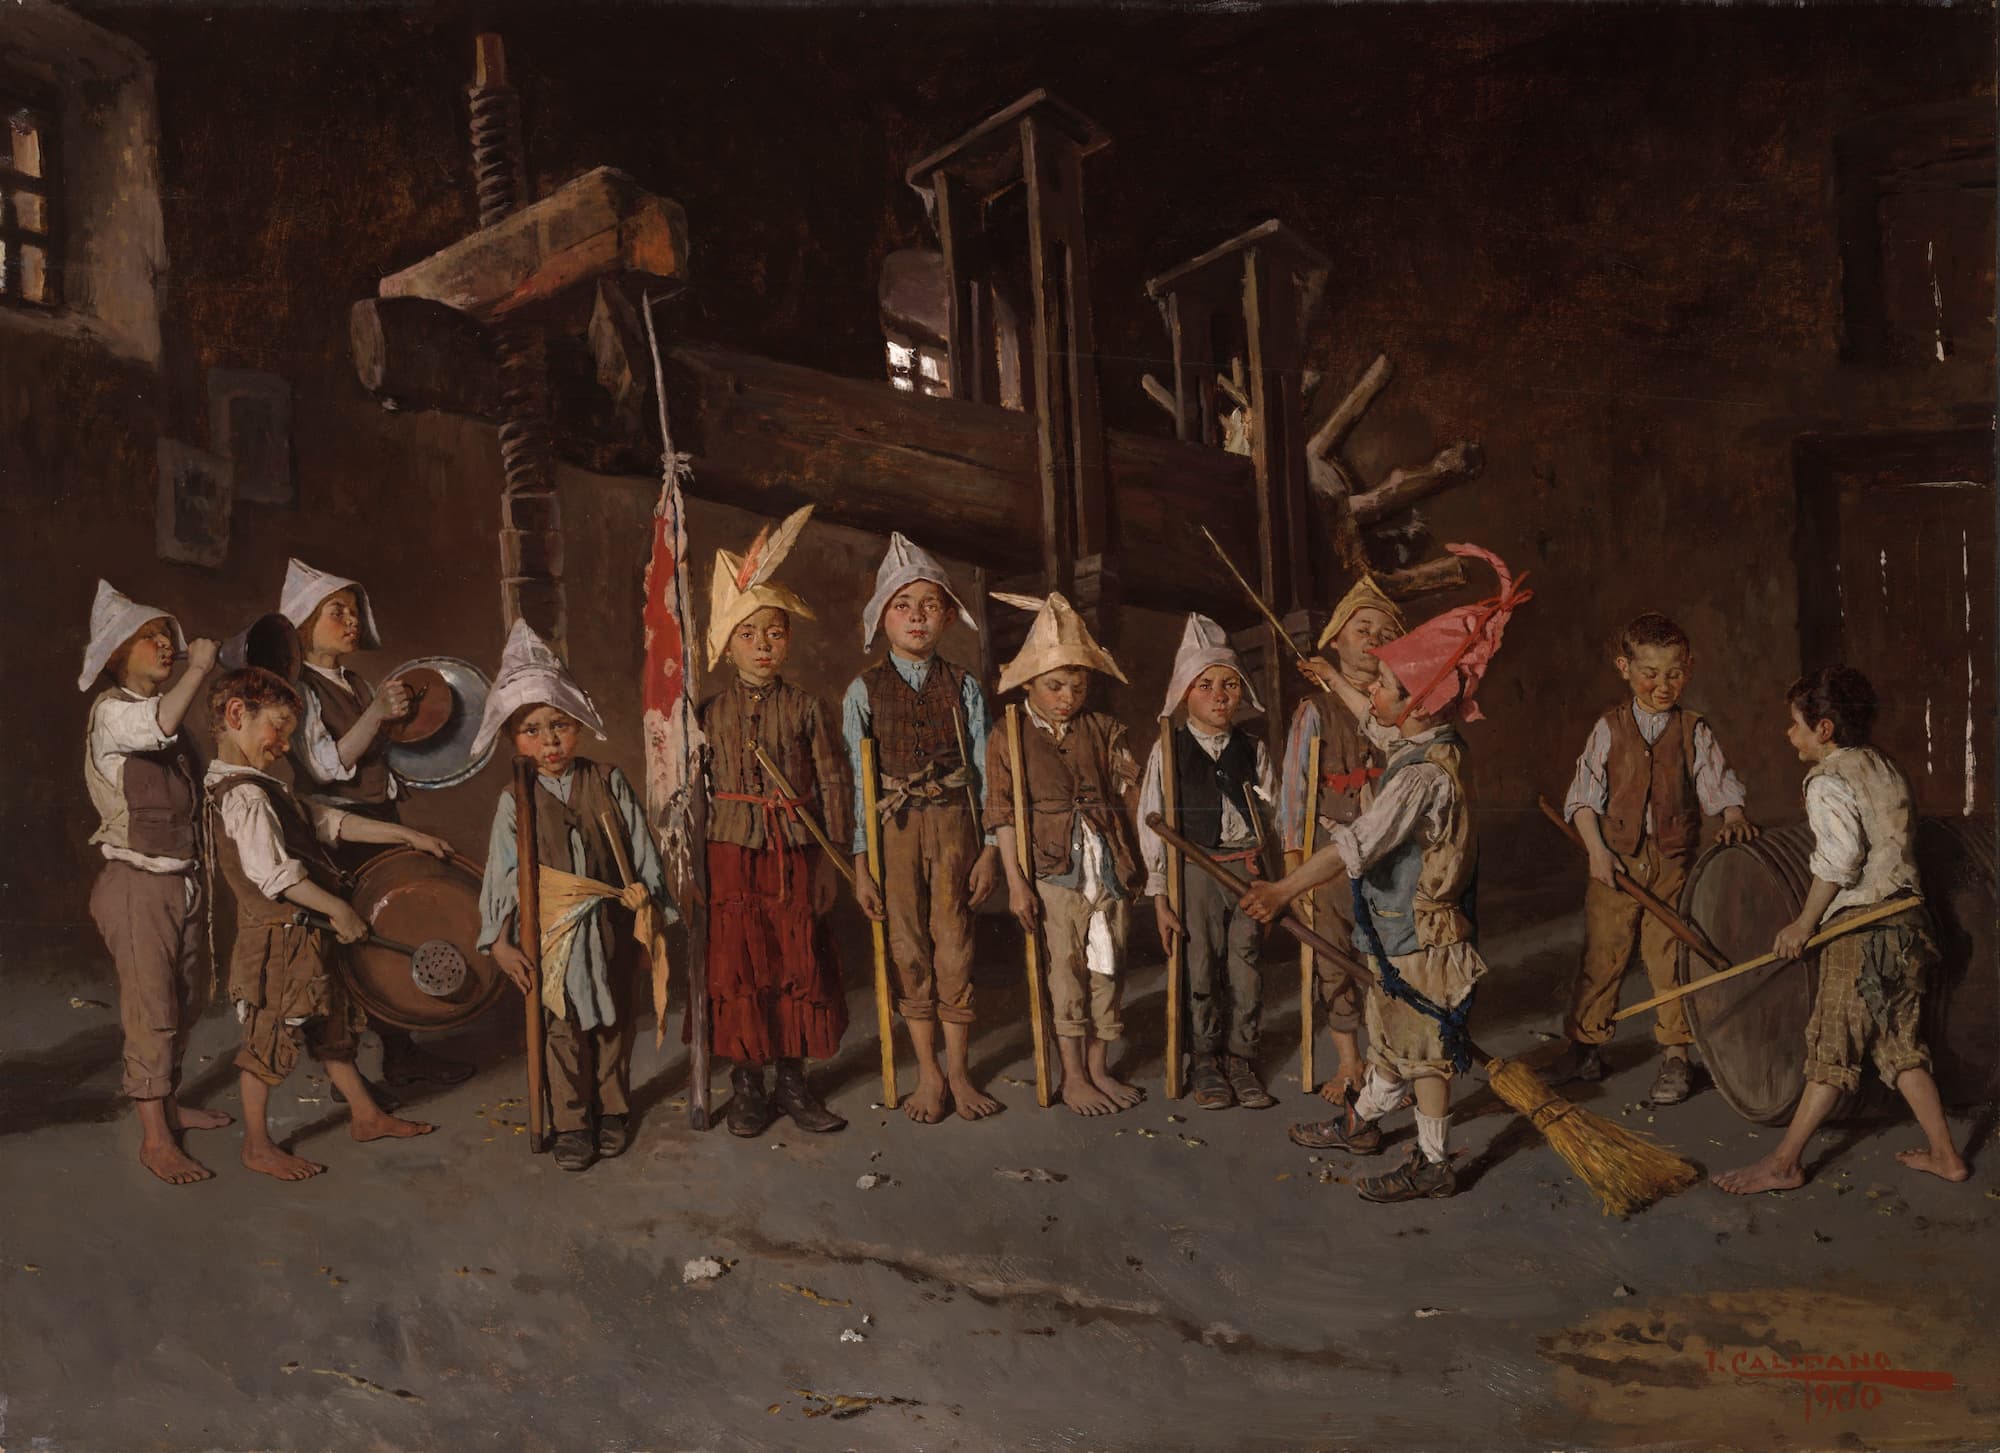 A painting of a group of children playing like Revolutionary War soldiers in a barn